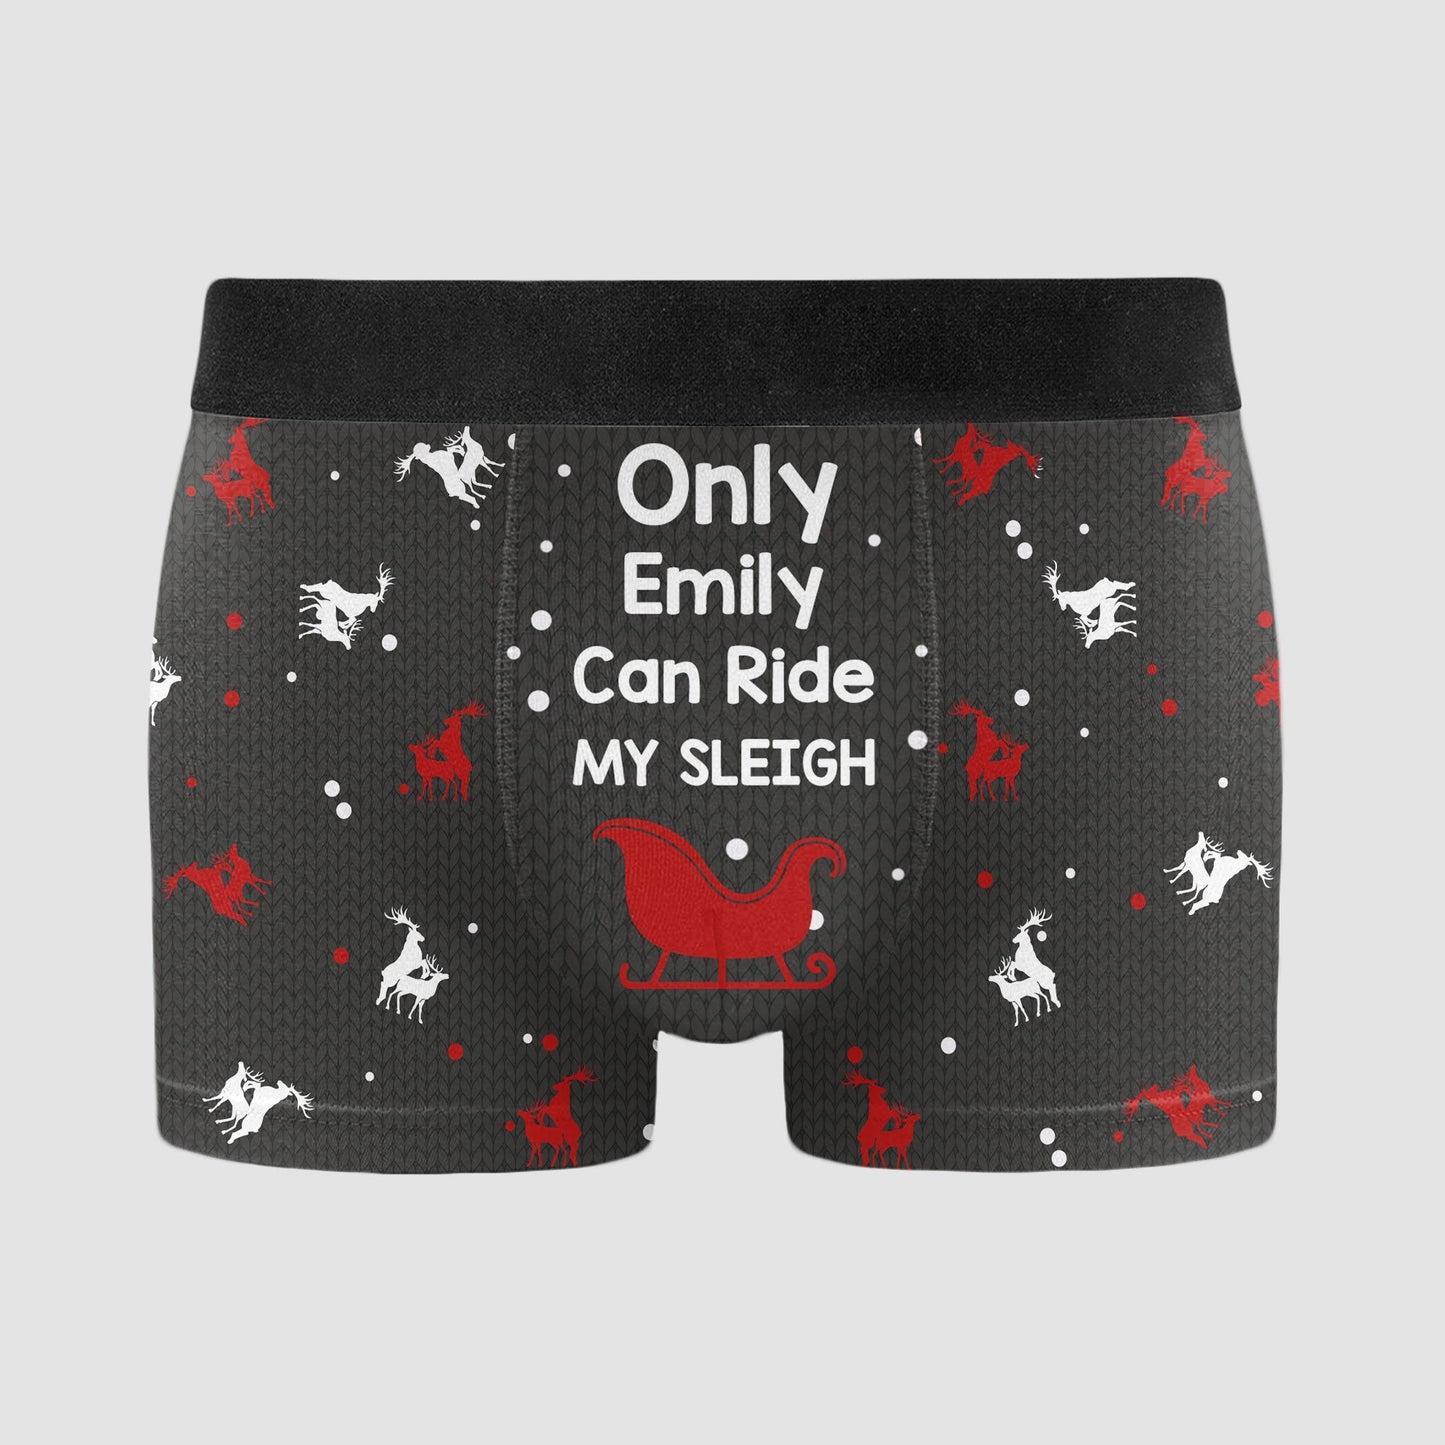 Frankly Funny Christmas Mens Funny Briefs Boxer Shorts - Reindeer